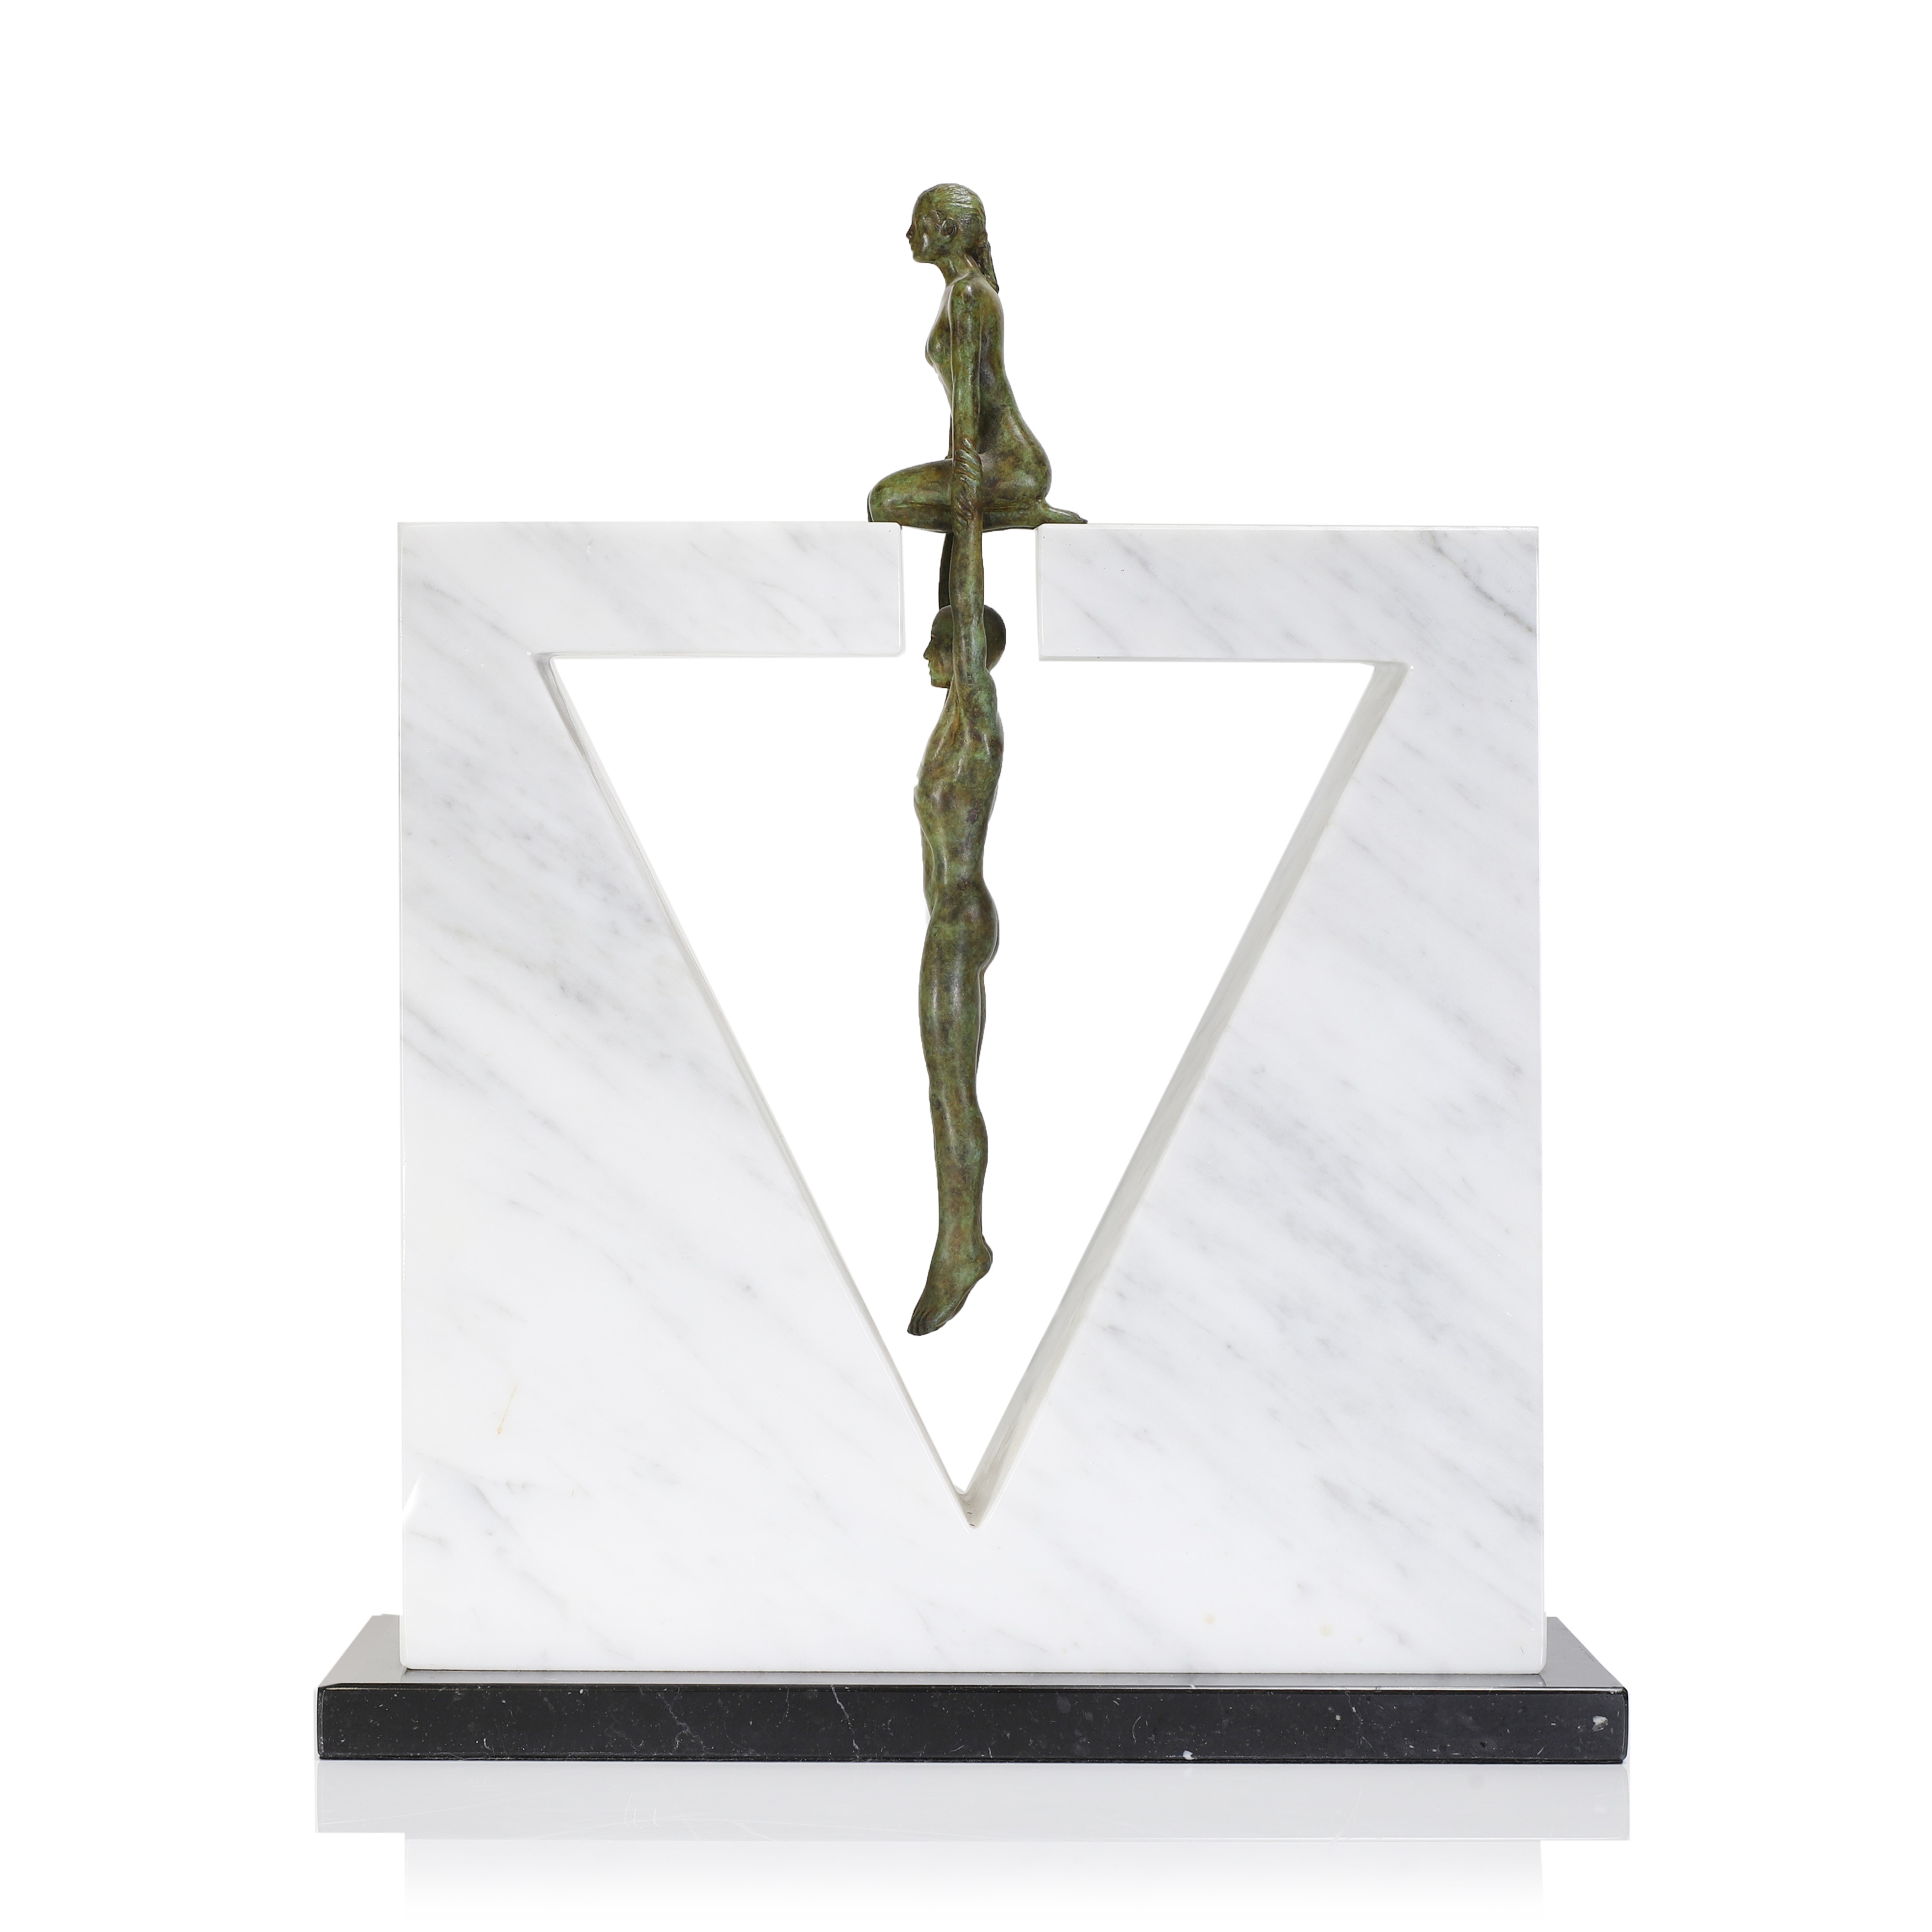 Lorenzo Quinn (b.1966) Gravity Female, 2016 bronze and marble, on a plinth, limited edition 60/99, 34cm wide 12cm deep 41.5cm high, with original box and certificate (£2,000-3,000)